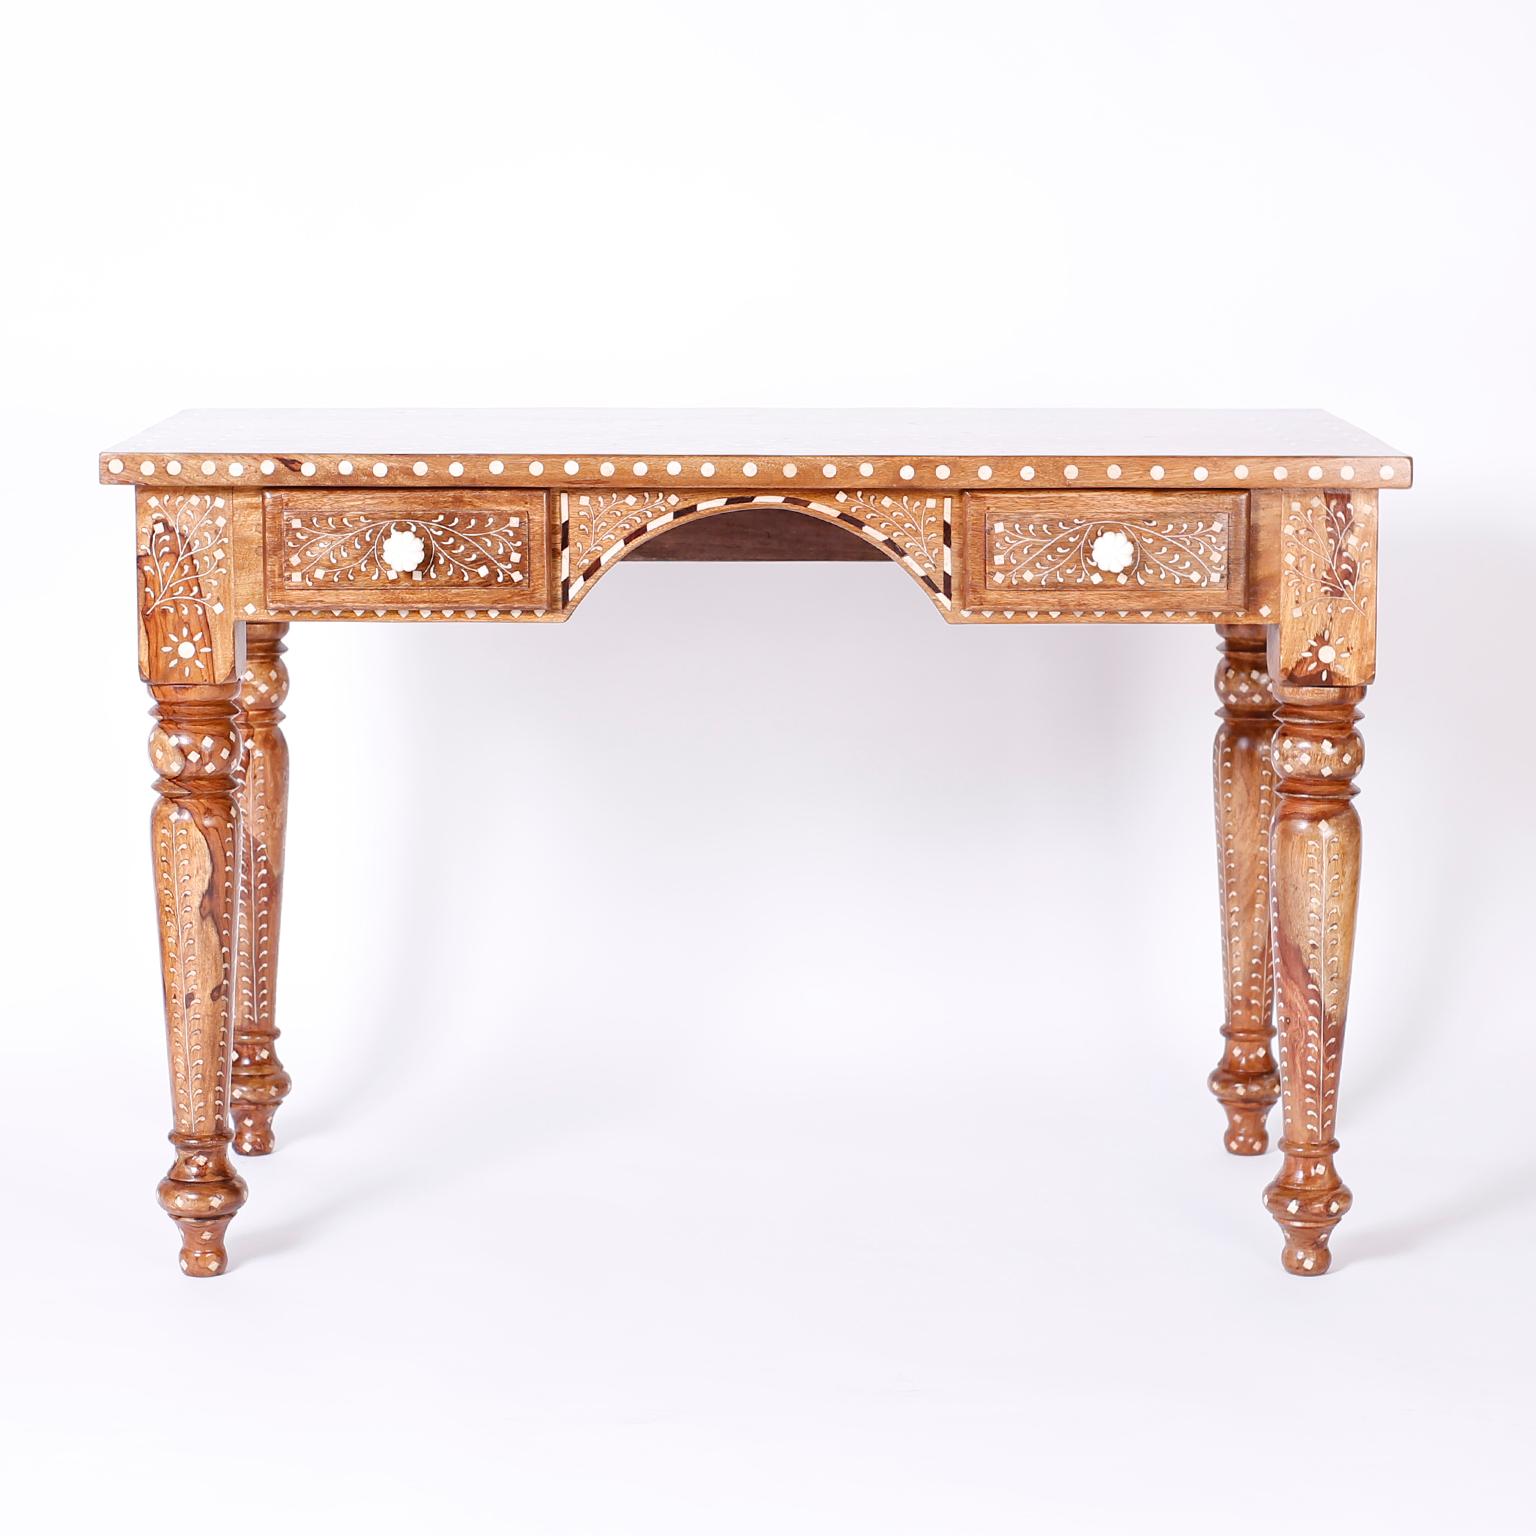 Anglo Indian two-drawer writing desk with symbolic inlays of bone and ebony. The dramatic top has a center medallion and emanating floral motifs, the turned legs feature exotic wood grains.